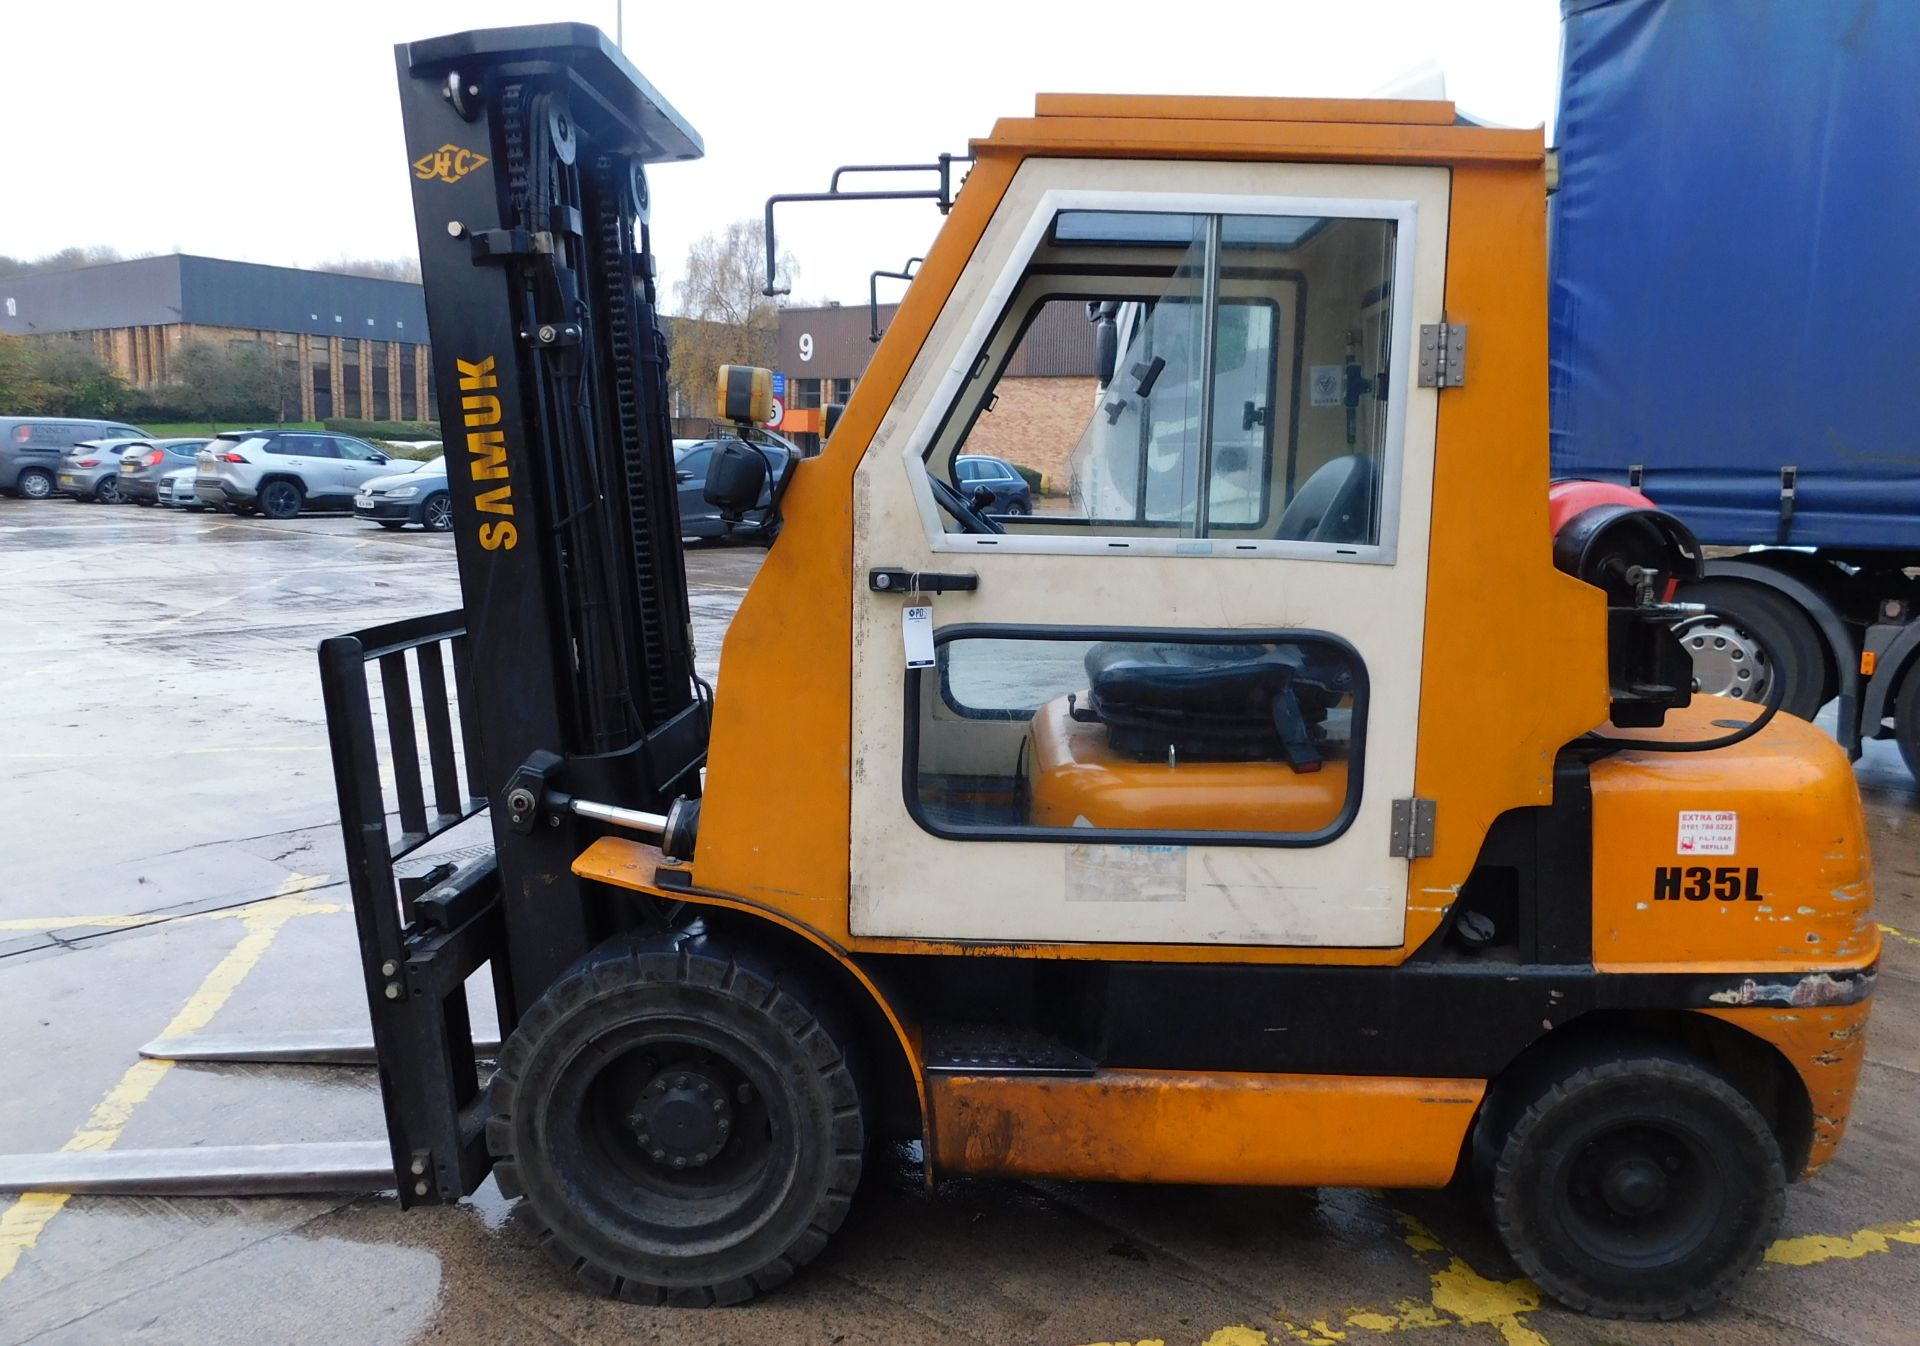 2007 Samuk H35L Gas Powered Forklift, Serial Number 070100559 (Located North Manchester. Please - Image 8 of 13